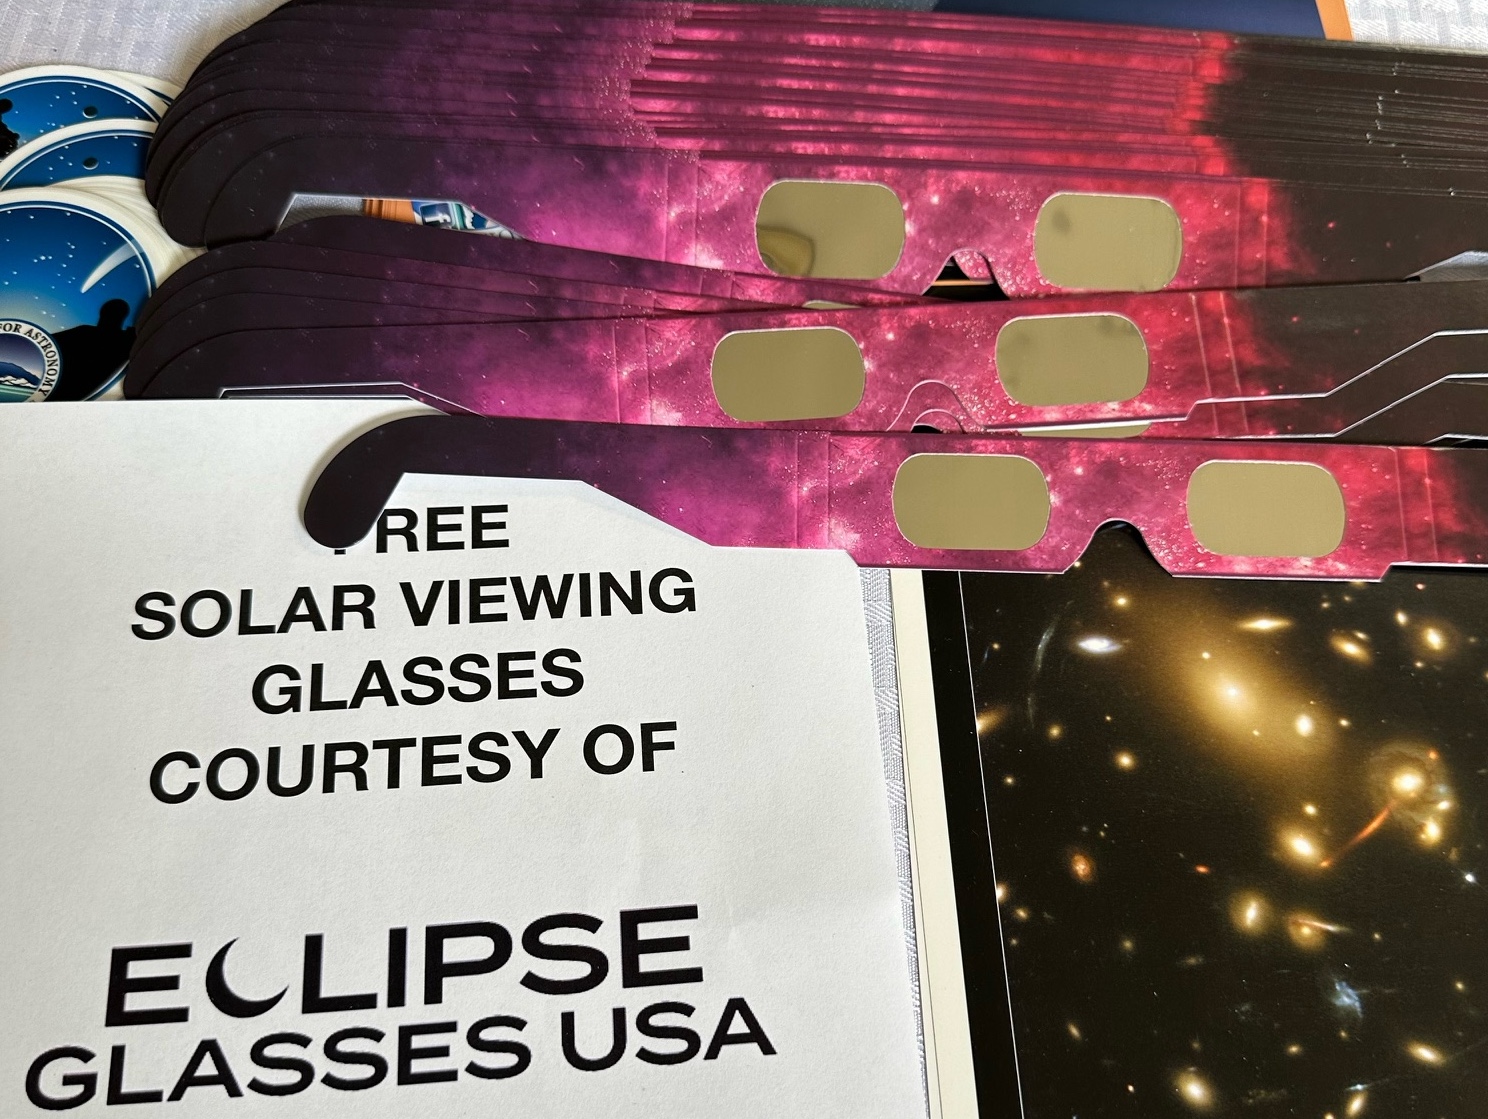 Eclipse Glasses USA Makes Significant Eclipse Glasses Donation to UH Institute for Astronomy